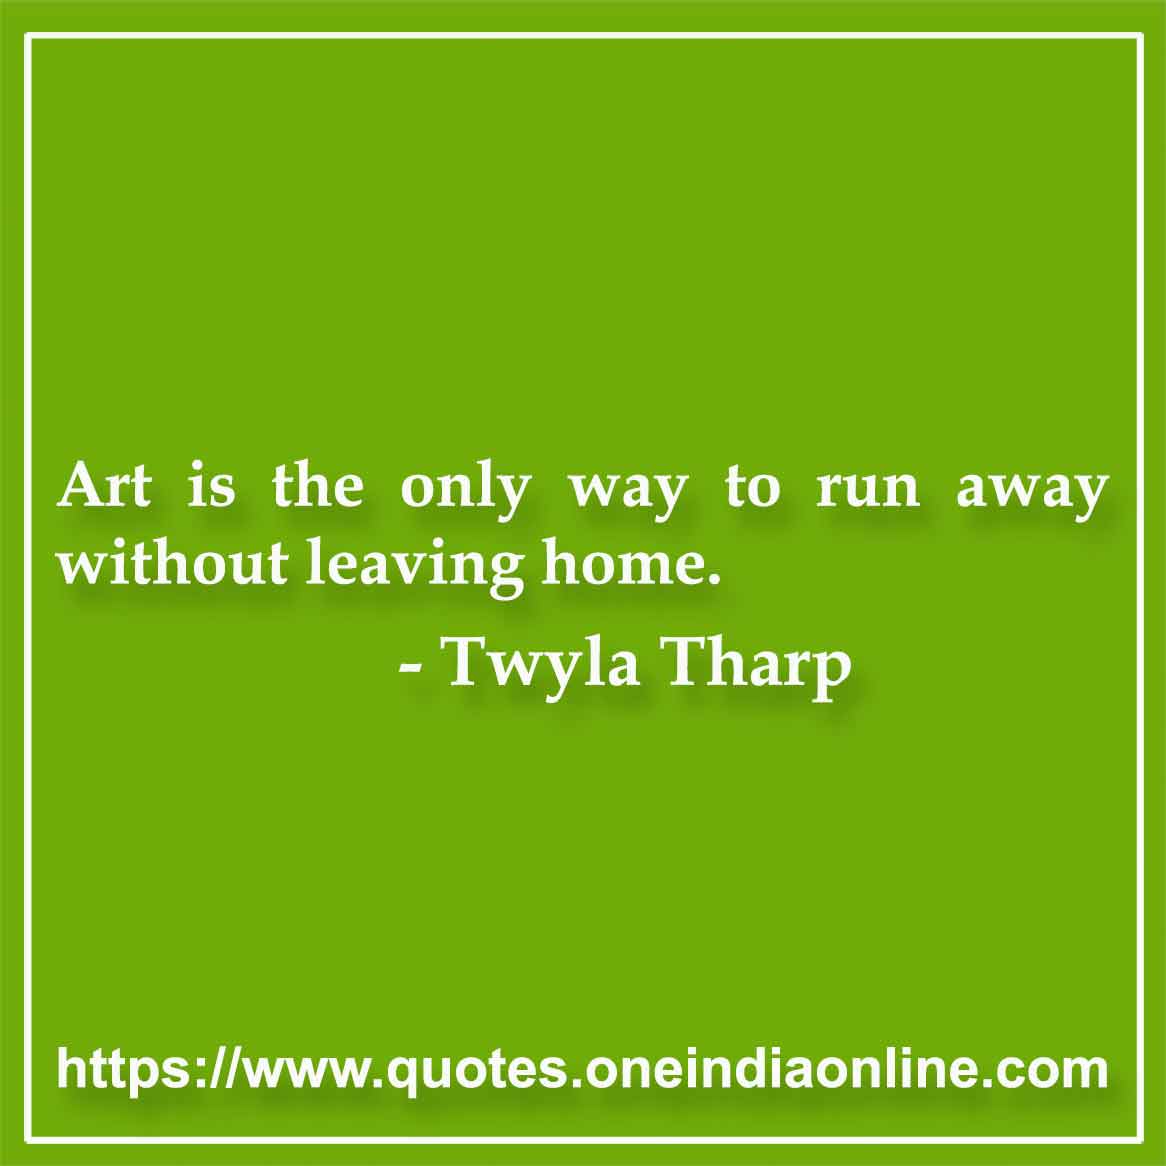 Art is the only way to run away without leaving home.

- Twyla Tharp